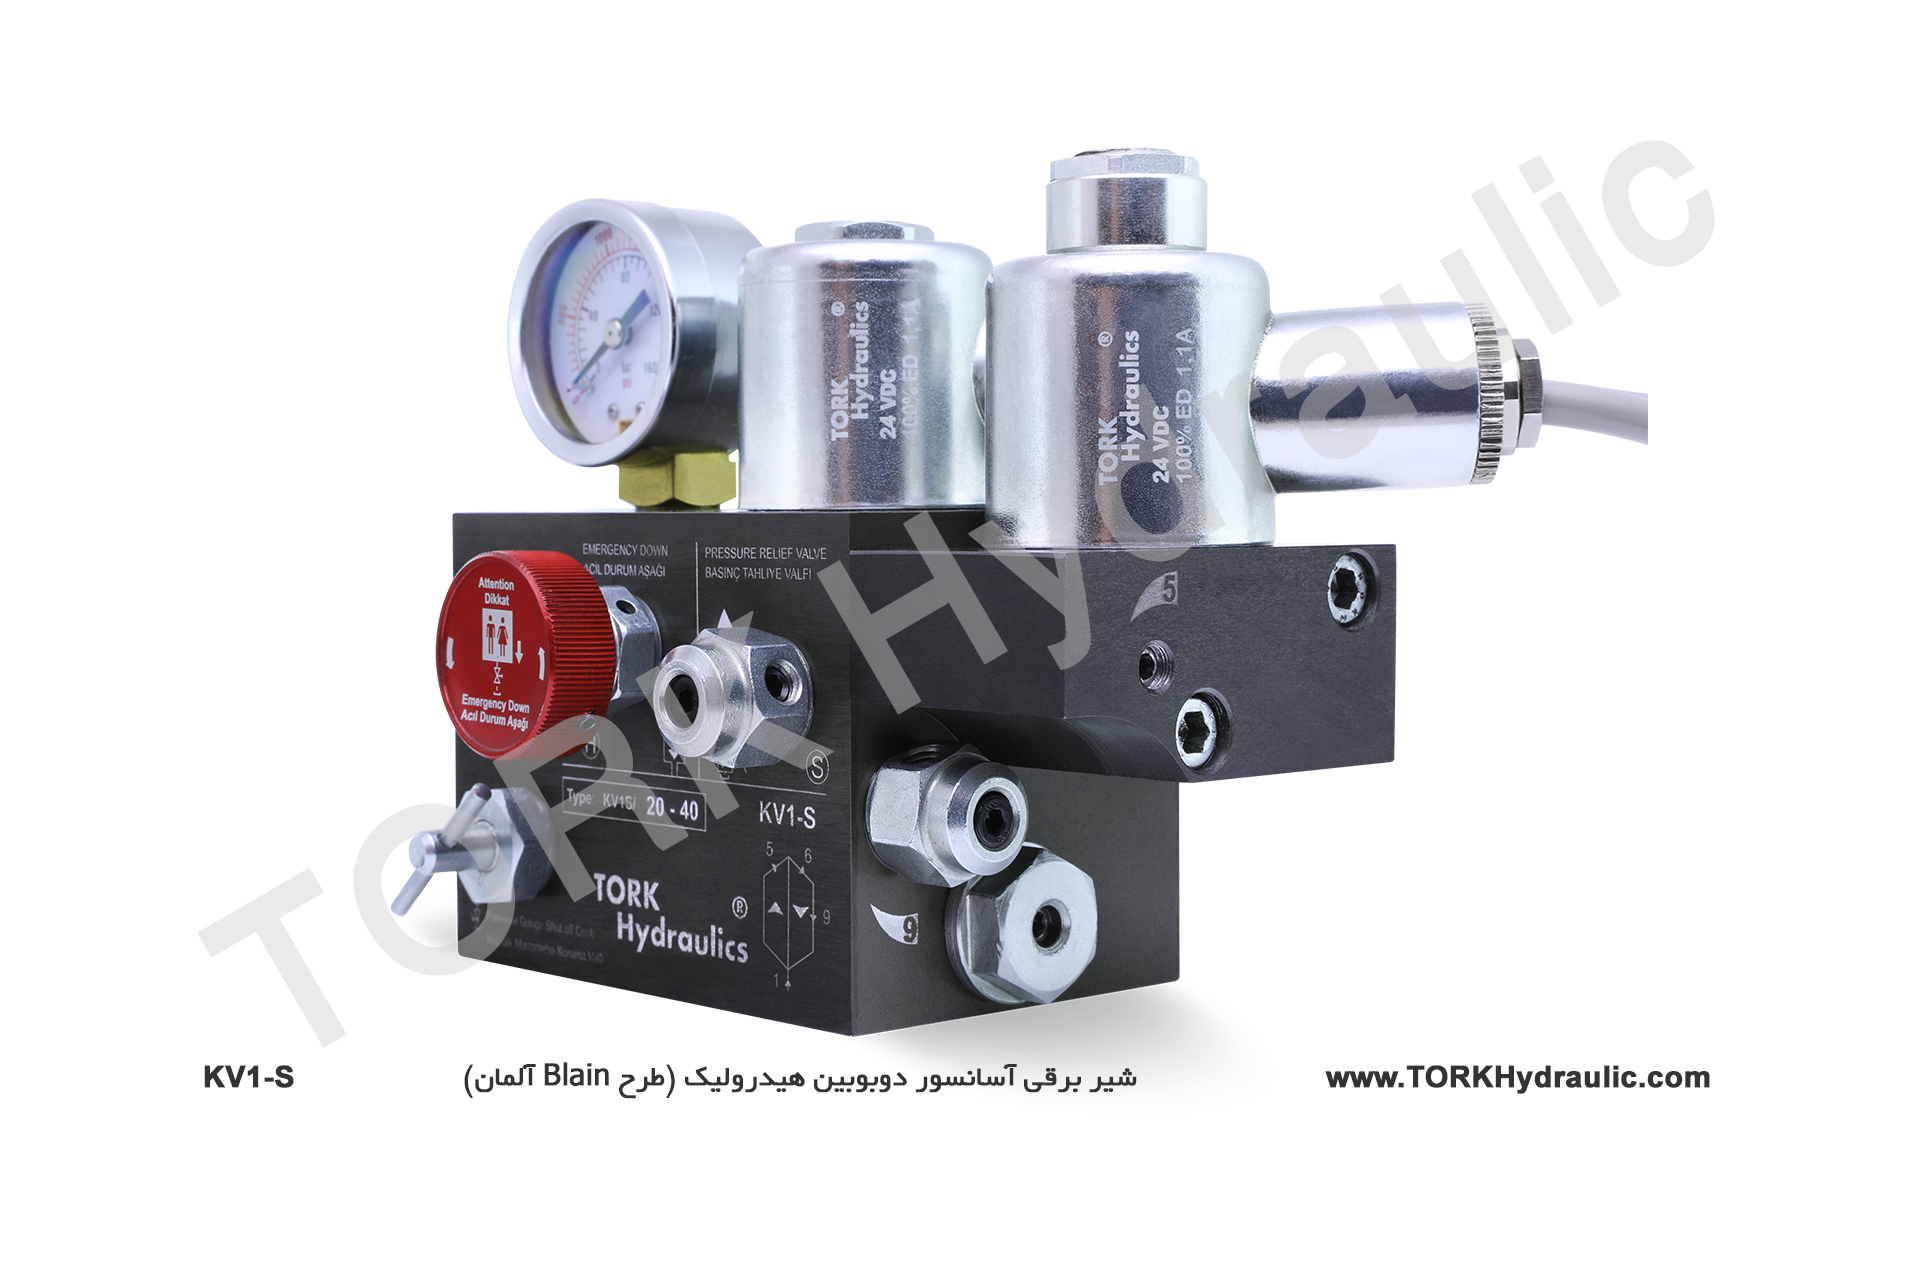 TORK Hydraulics double coil solenoid valve